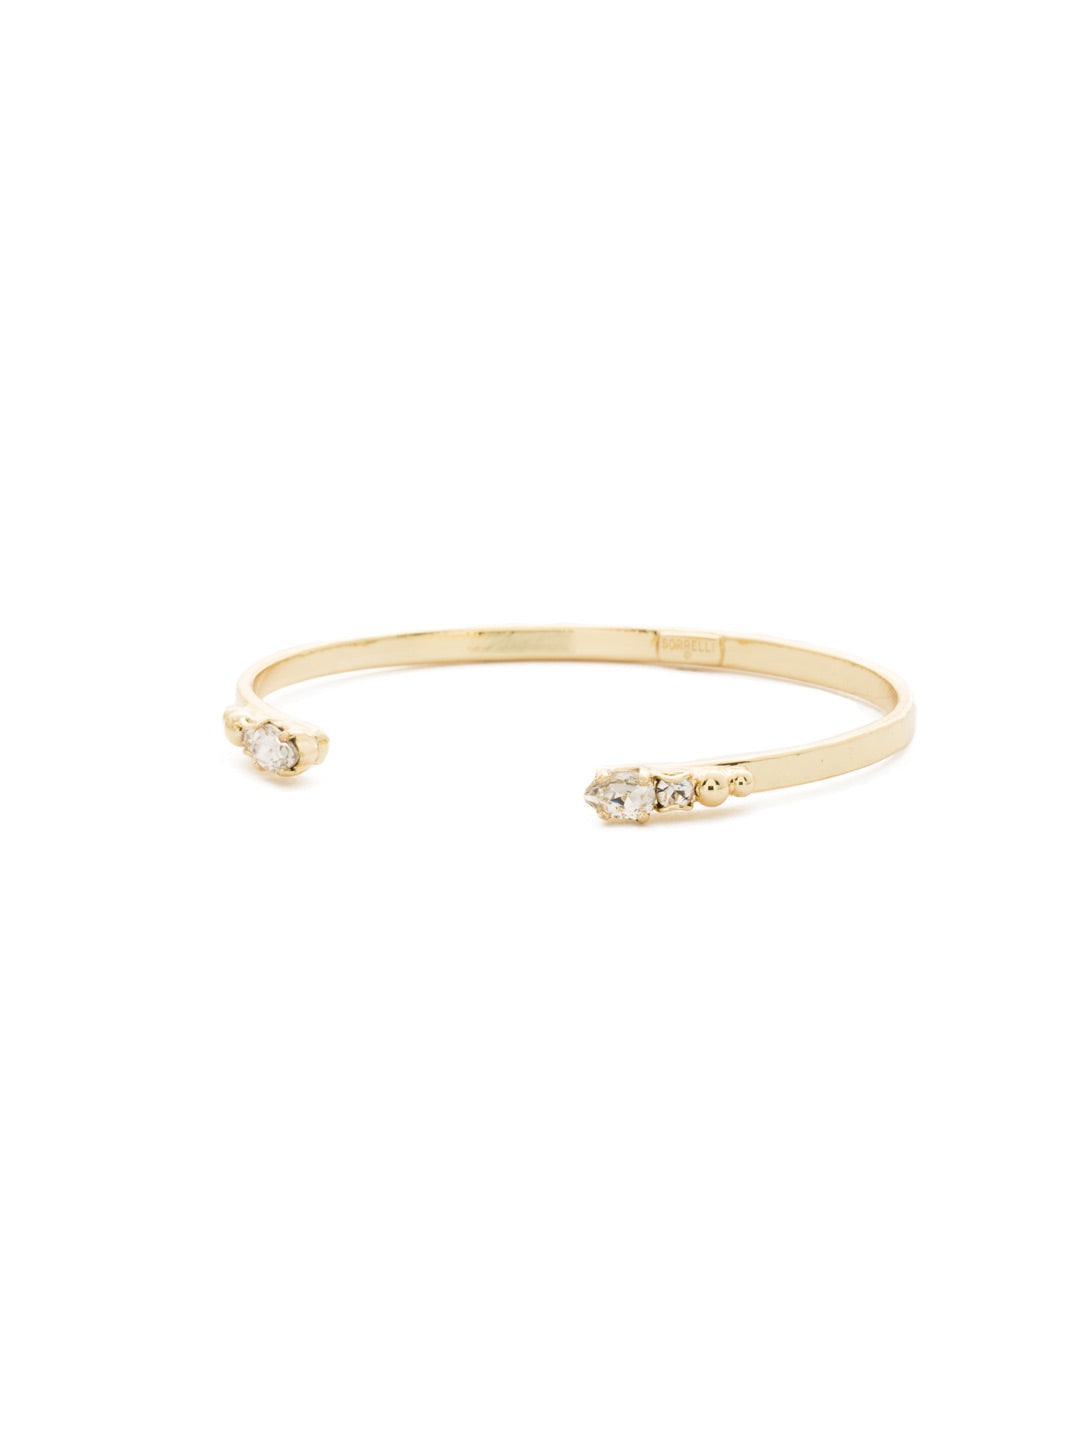 Simple Styling Open Cuff Bracelet - BDN9BGCRY - The perfect layering cuff simply adorned with crystals on both ends.